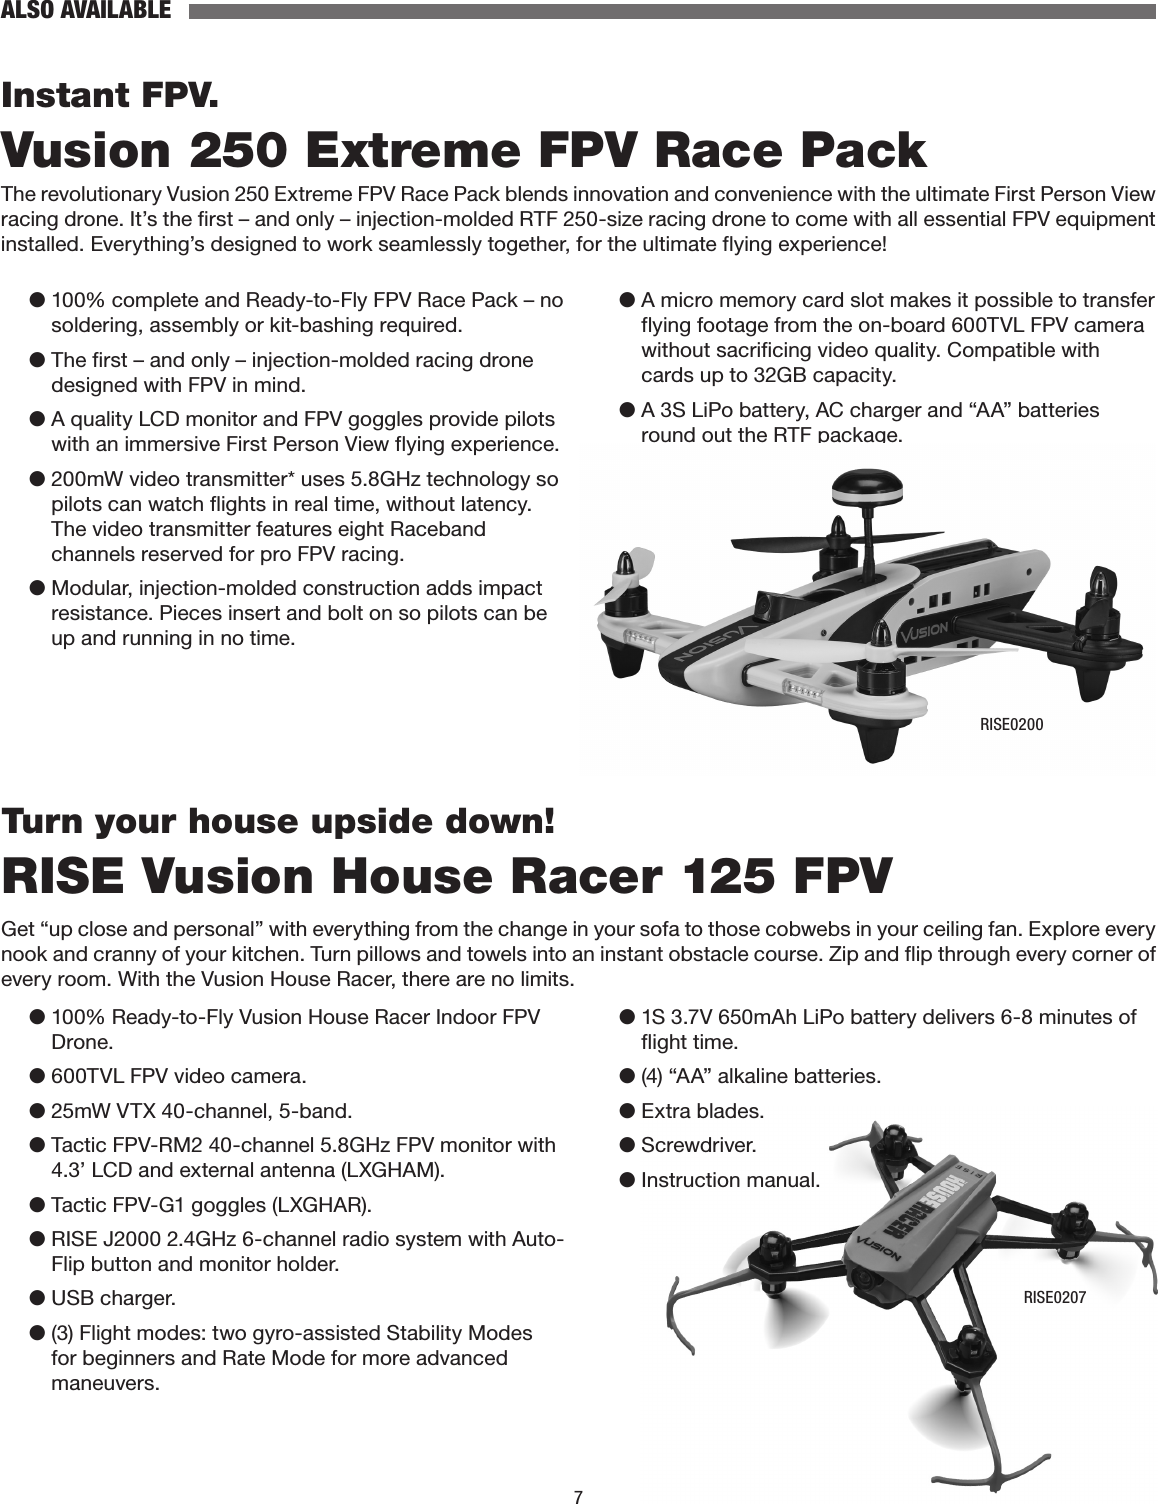 7ALSO AVAILABLEInstant FPV.Vusion 250 Extreme FPV Race PackThe revolutionary Vusion 250 Extreme FPV Race Pack blends innovation and convenience with the ultimate First Person View racing drone. It’s the first – and only – injection-molded RTF 250-size racing drone to come with all essential FPV equipment installed. Everything’s designed to work seamlessly together, for the ultimate flying experience!●  100% complete and Ready-to-Fly FPV Race Pack – no soldering, assembly or kit-bashing required.●  The first – and only – injection-molded racing drone designed with FPV in mind.●  A quality LCD monitor and FPV goggles provide pilots with an immersive First Person View flying experience.●  200mW video transmitter* uses 5.8GHz technology so pilots can watch flights in real time, without latency. The video transmitter features eight Raceband channels reserved for pro FPV racing.●  Modular, injection-molded construction adds impact resistance. Pieces insert and bolt on so pilots can be up and running in no time.●  A micro memory card slot makes it possible to transfer flying footage from the on-board 600TVL FPV camera without sacrificing video quality. Compatible with cards up to 32GB capacity.●  A 3S LiPo battery, AC charger and “AA” batteries round out the RTF package.RISE0200Turn your house upside down!RISE Vusion House Racer 125 FPVGet “up close and personal” with everything from the change in your sofa to those cobwebs in your ceiling fan. Explore every nook and cranny of your kitchen. Turn pillows and towels into an instant obstacle course. Zip and flip through every corner of every room. With the Vusion House Racer, there are no limits.●  100% Ready-to-Fly Vusion House Racer Indoor FPV Drone.●  600TVL FPV video camera.●  25mW VTX 40-channel, 5-band.●  Tactic FPV-RM2 40-channel 5.8GHz FPV monitor with 4.3’ LCD and external antenna (LXGHAM).●  Tactic FPV-G1 goggles (LXGHAR).●  RISE J2000 2.4GHz 6-channel radio system with Auto-Flip button and monitor holder.●  USB charger.●  (3) Flight modes: two gyro-assisted Stability Modes for beginners and Rate Mode for more advanced maneuvers.●  1S 3.7V 650mAh LiPo battery delivers 6-8 minutes of flight time.●  (4) “AA” alkaline batteries.●  Extra blades.●  Screwdriver.●  Instruction manual.RISE0207